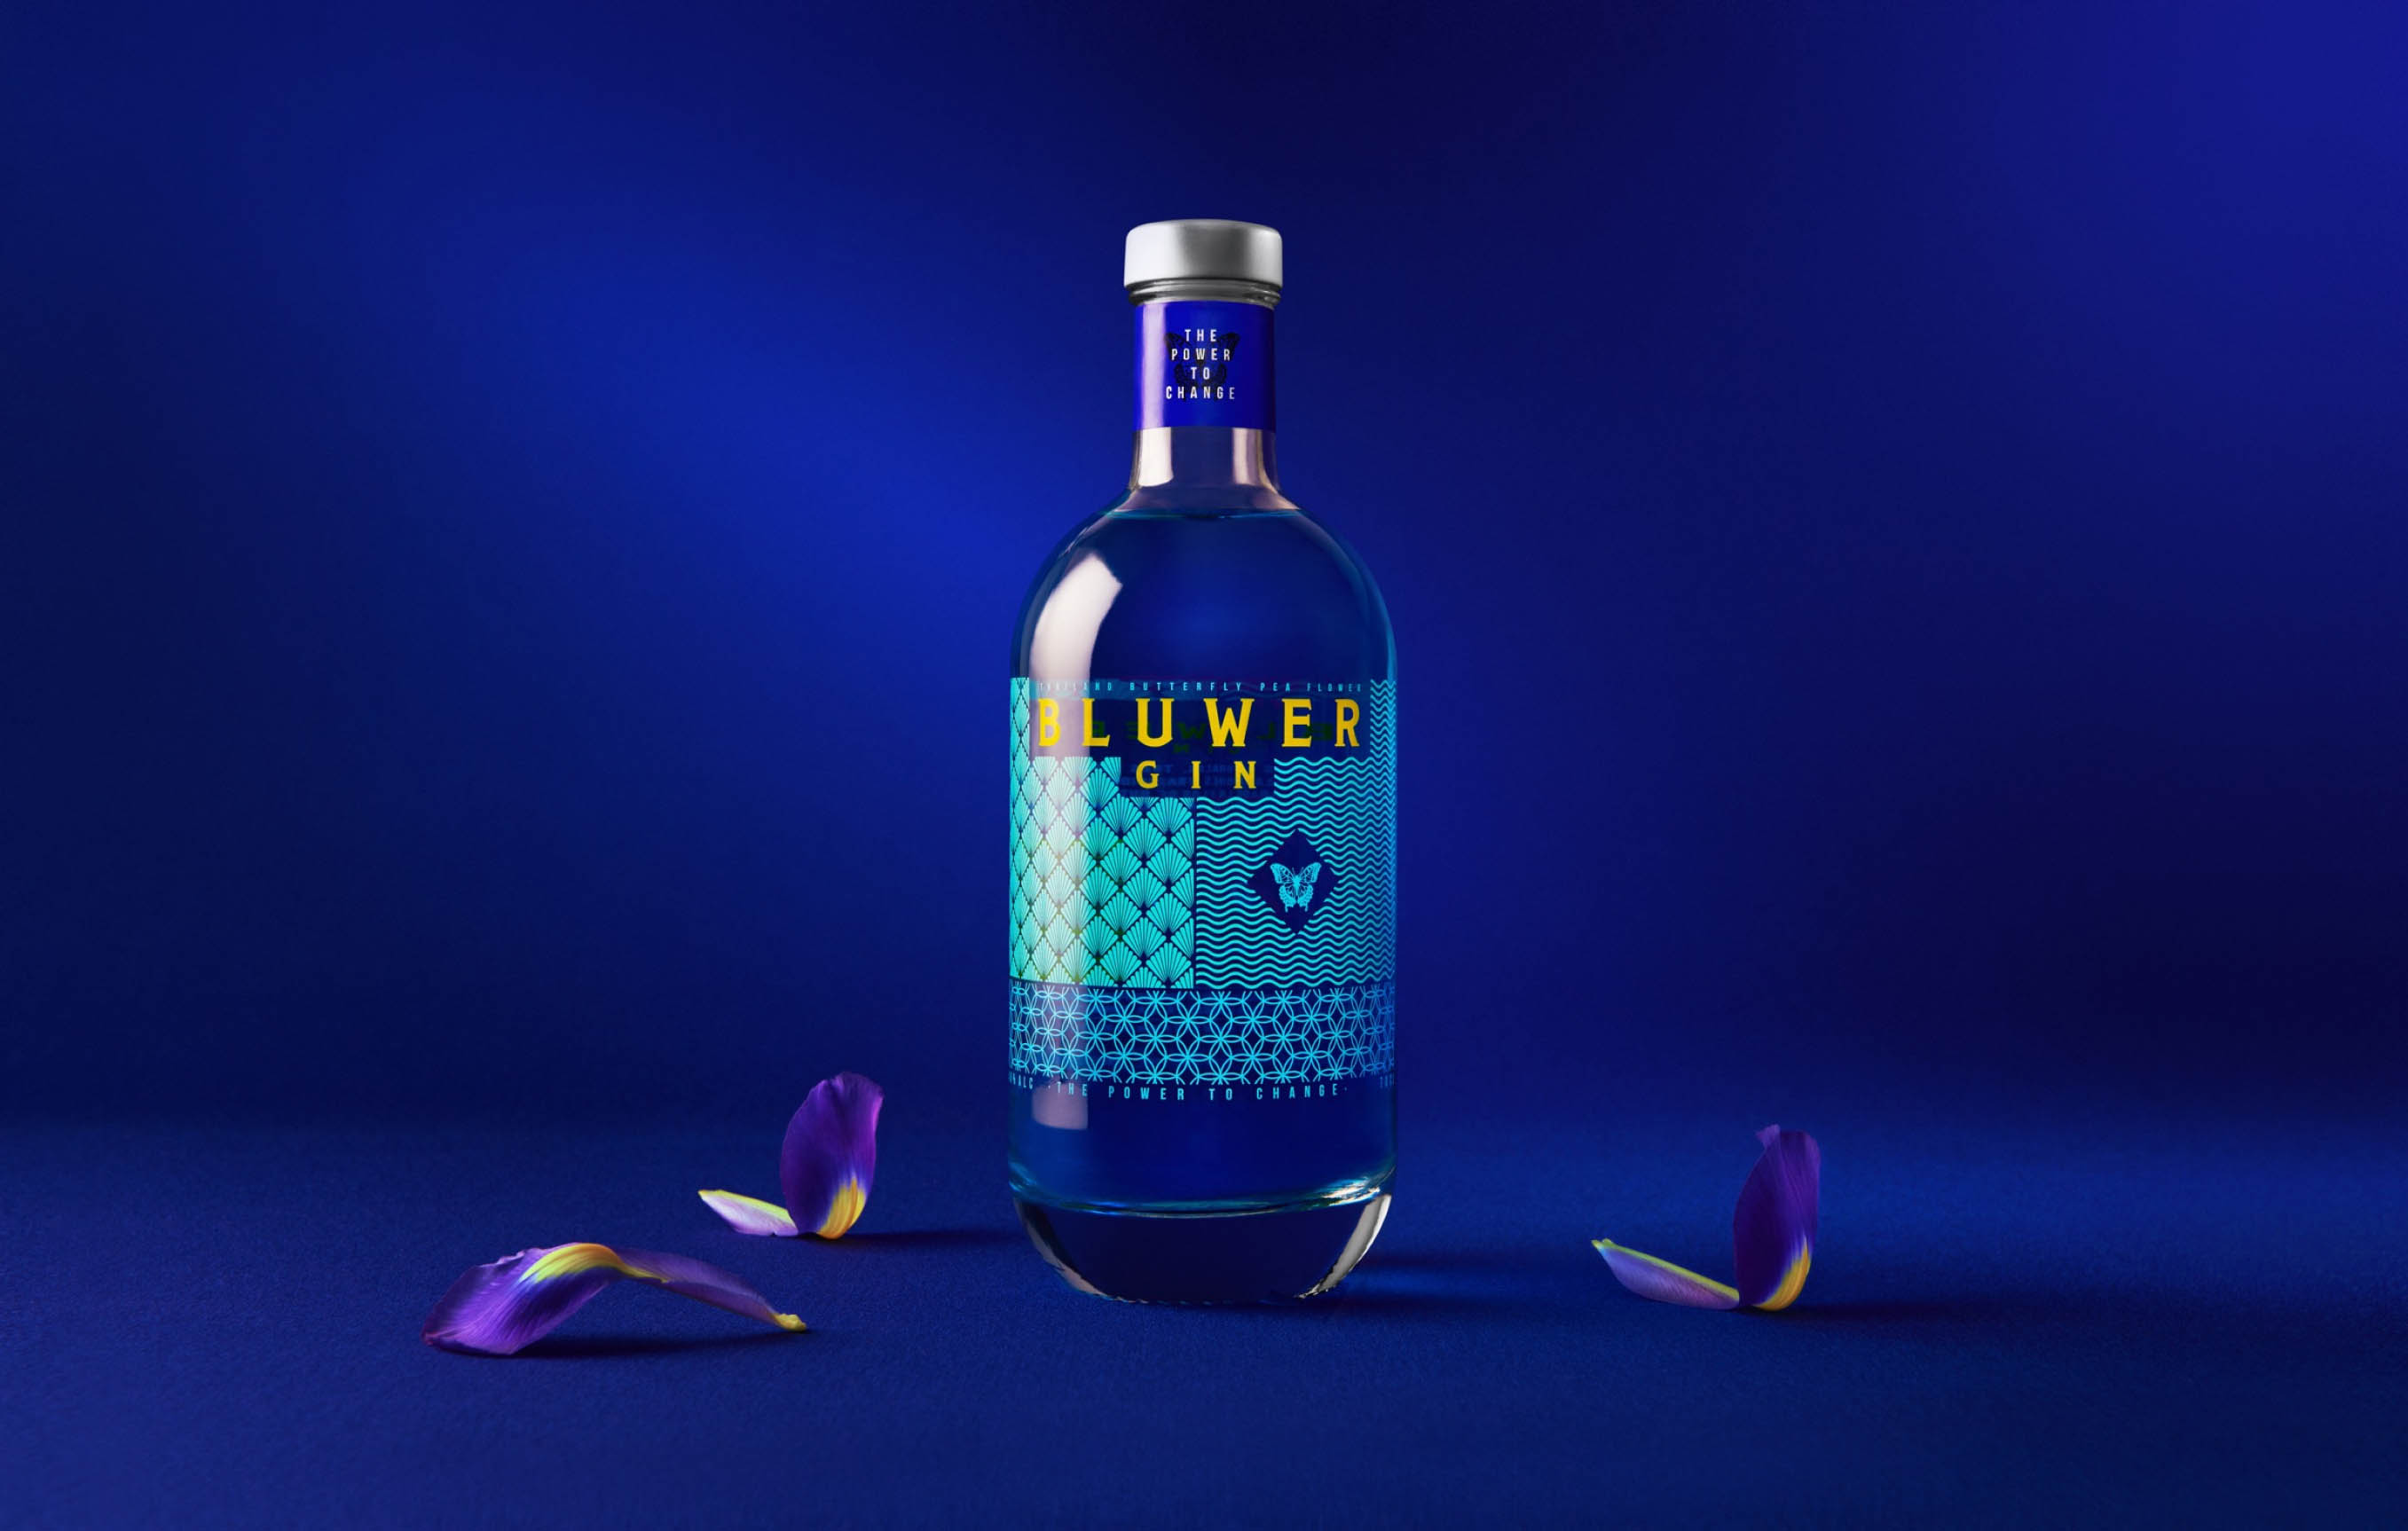 Bluwer is a gin born from uniqueness; from the peculiarity of being a blue-coloured gin that, on contact with citric acid, such as tonic or lemon, changes to a bright pink colour.
